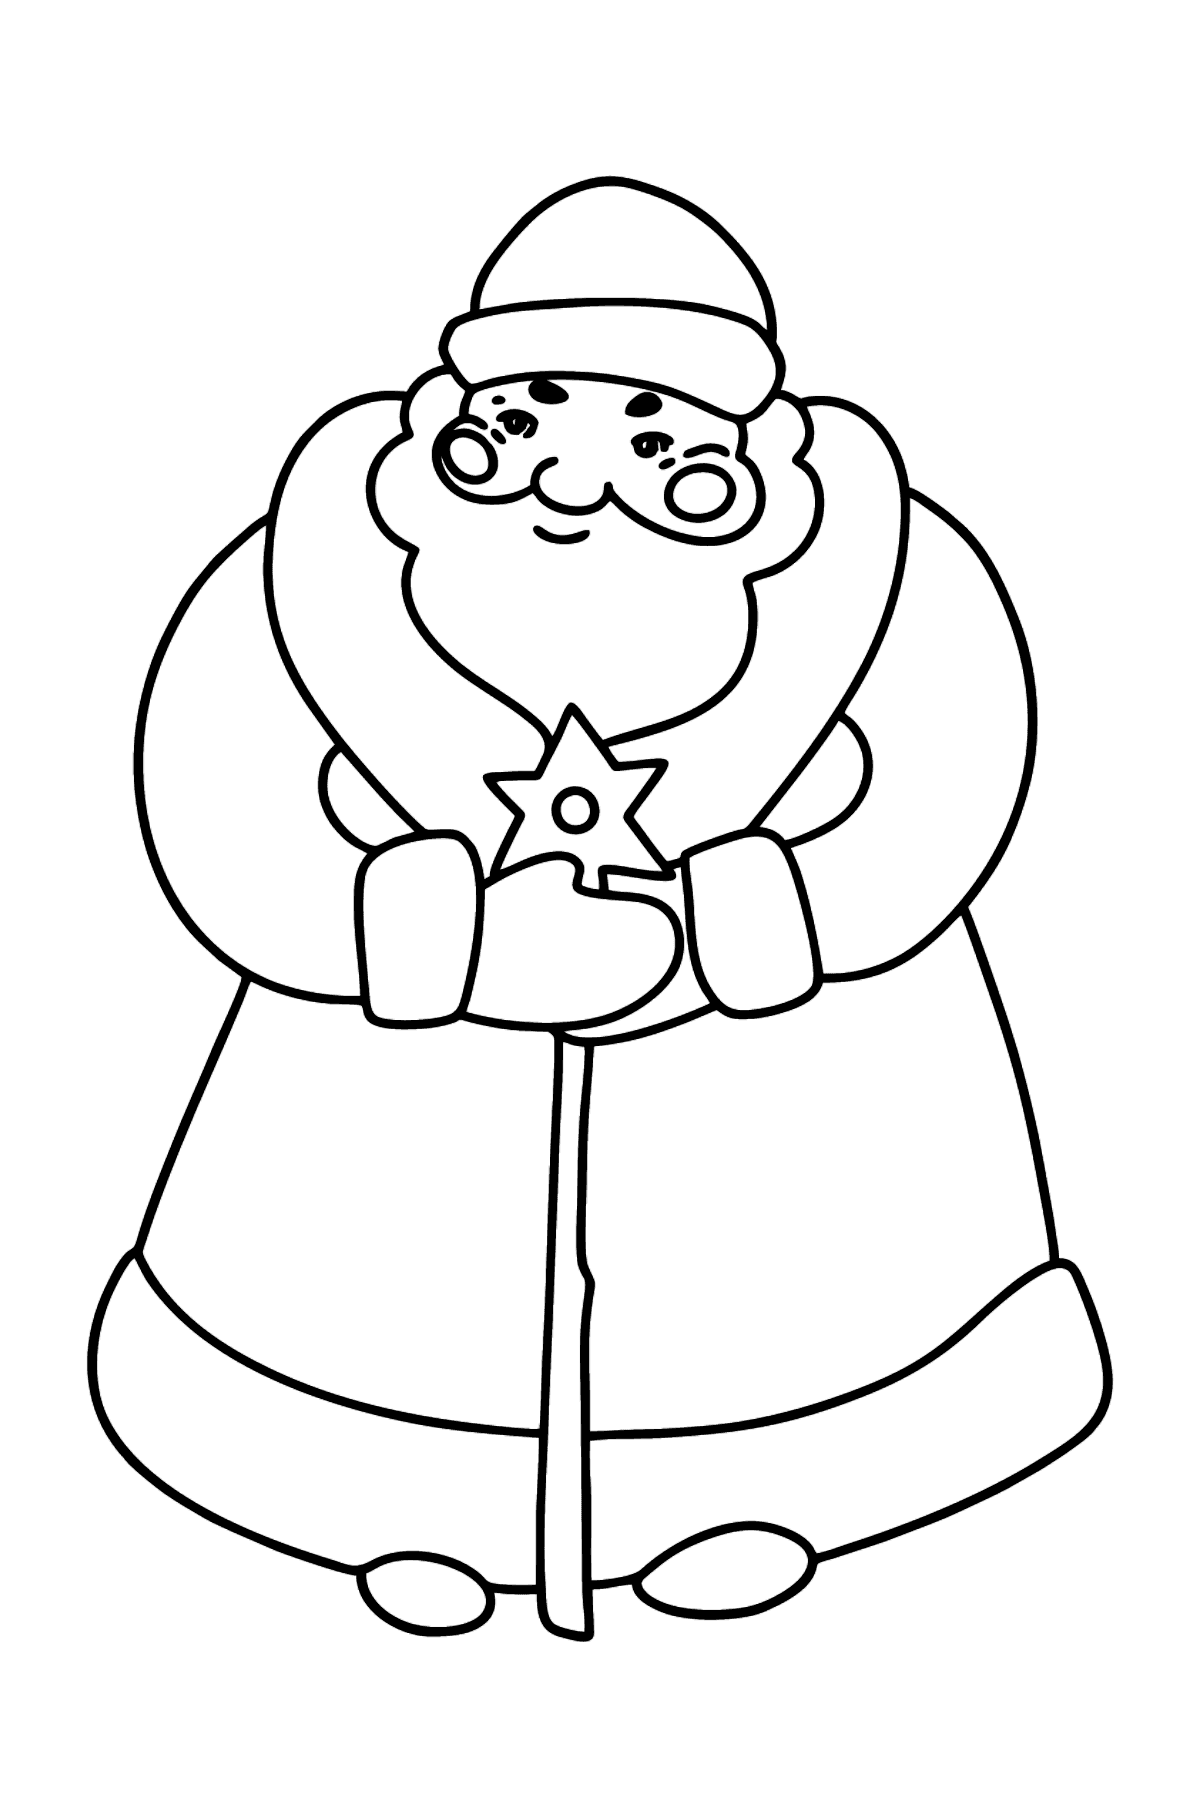 Good Father Frost coloring page - Coloring Pages for Kids